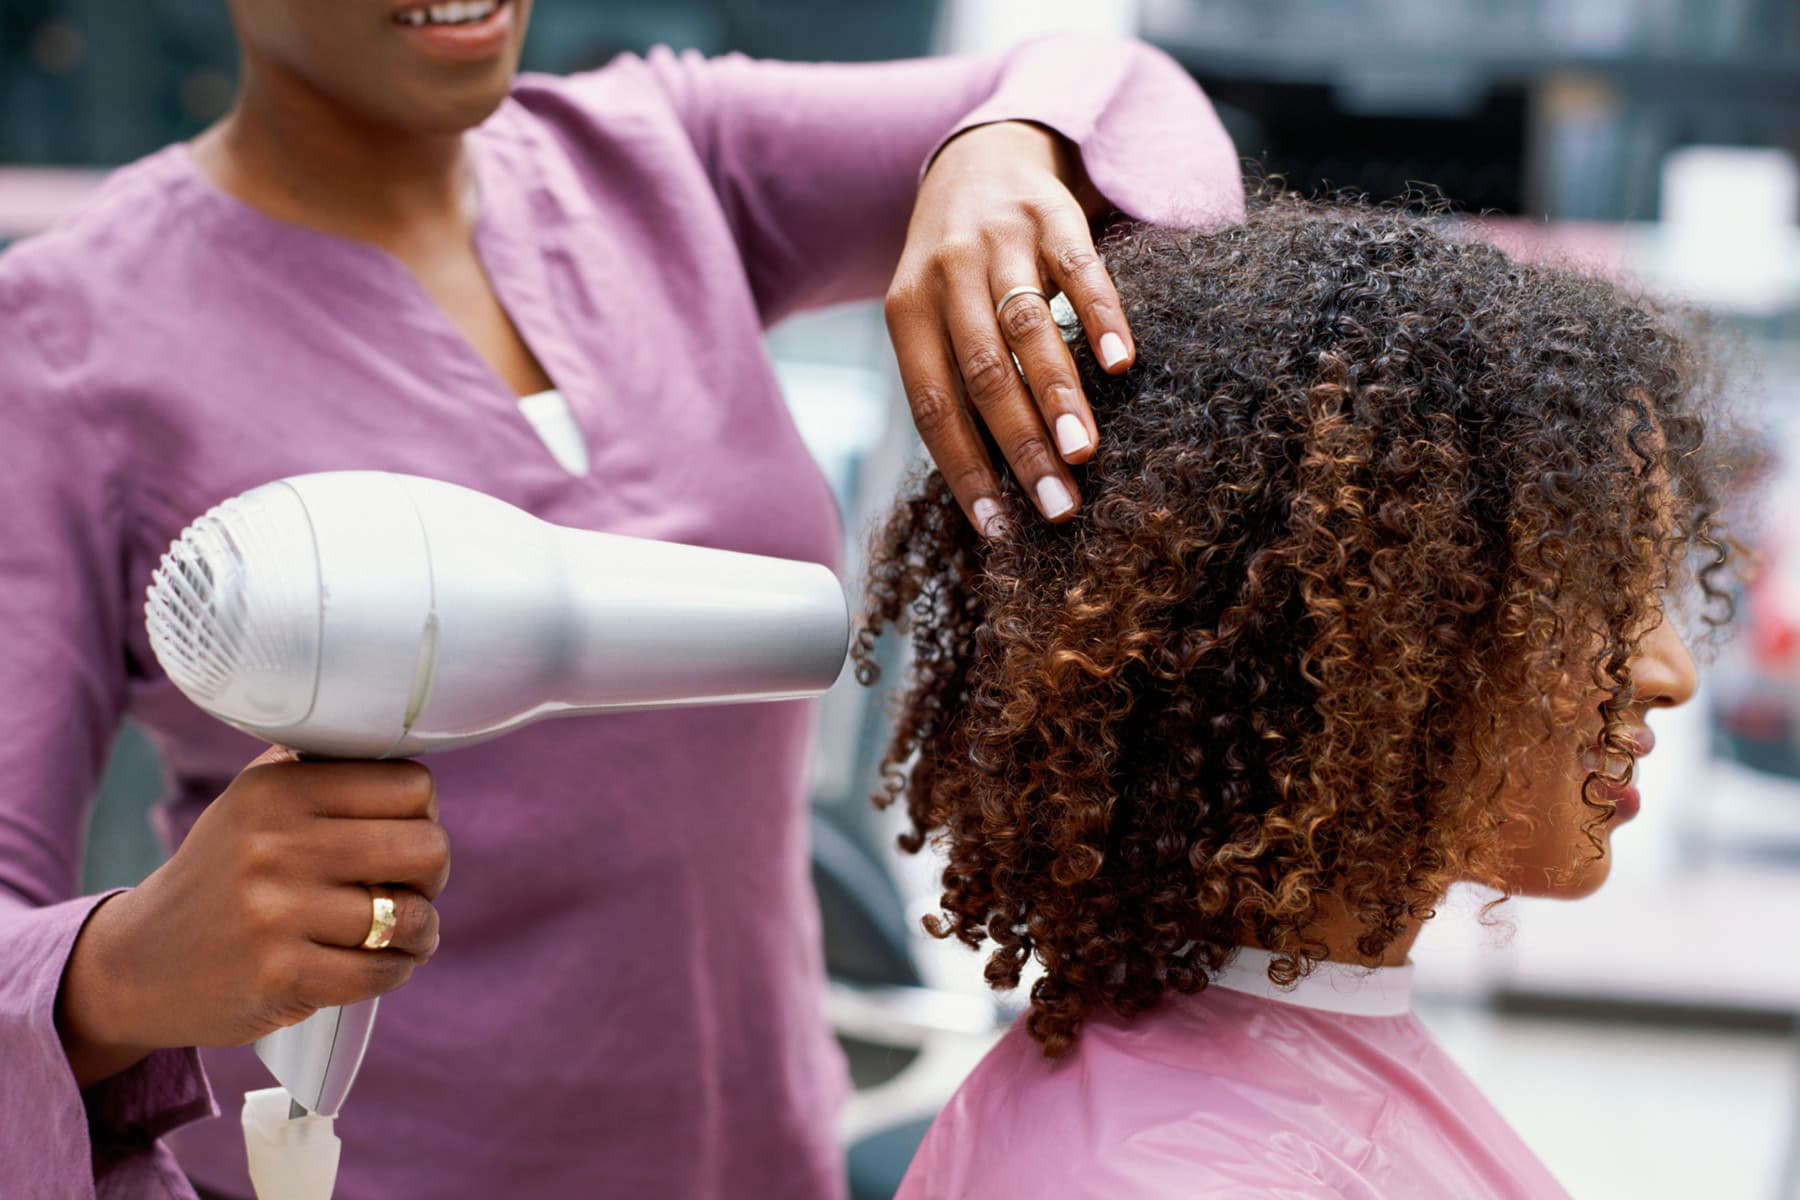 Natural Hair: What to Know Before You Color It